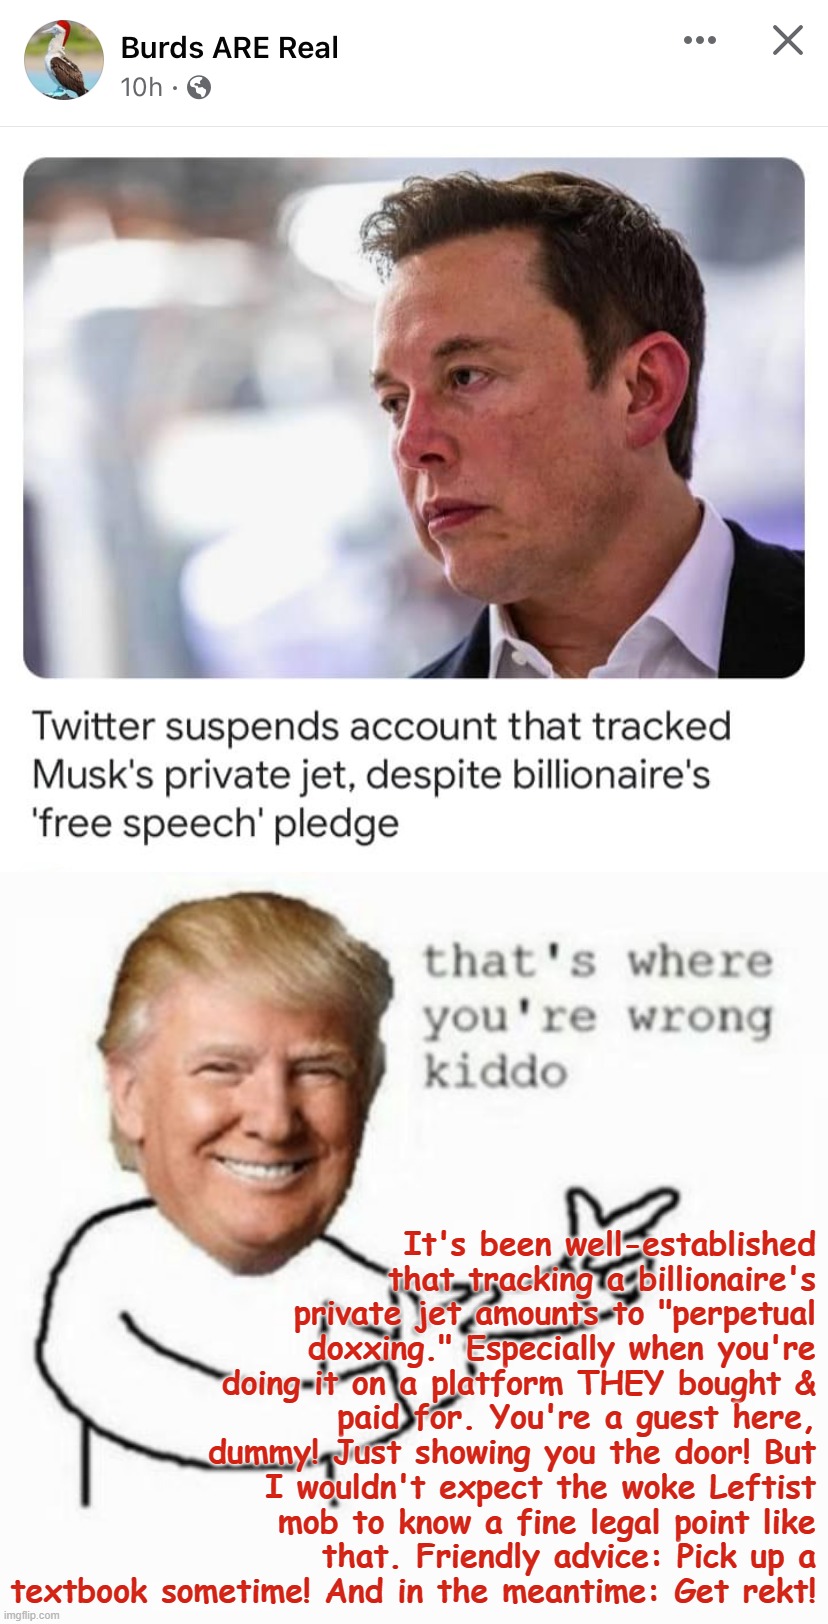 Elon Musk owns the Left yet again! I love this guy! | It's been well-established that tracking a billionaire's private jet amounts to "perpetual doxxing." Especially when you're doing it on a platform THEY bought & paid for. You're a guest here, dummy! Just showing you the door! But I wouldn't expect the woke Leftist mob to know a fine legal point like that. Friendly advice: Pick up a textbook sometime! And in the meantime: Get rekt! | image tagged in elon musk twitter hypocrite,that's where you're wrong,elon musk,private jet,free speech,not for you silly | made w/ Imgflip meme maker